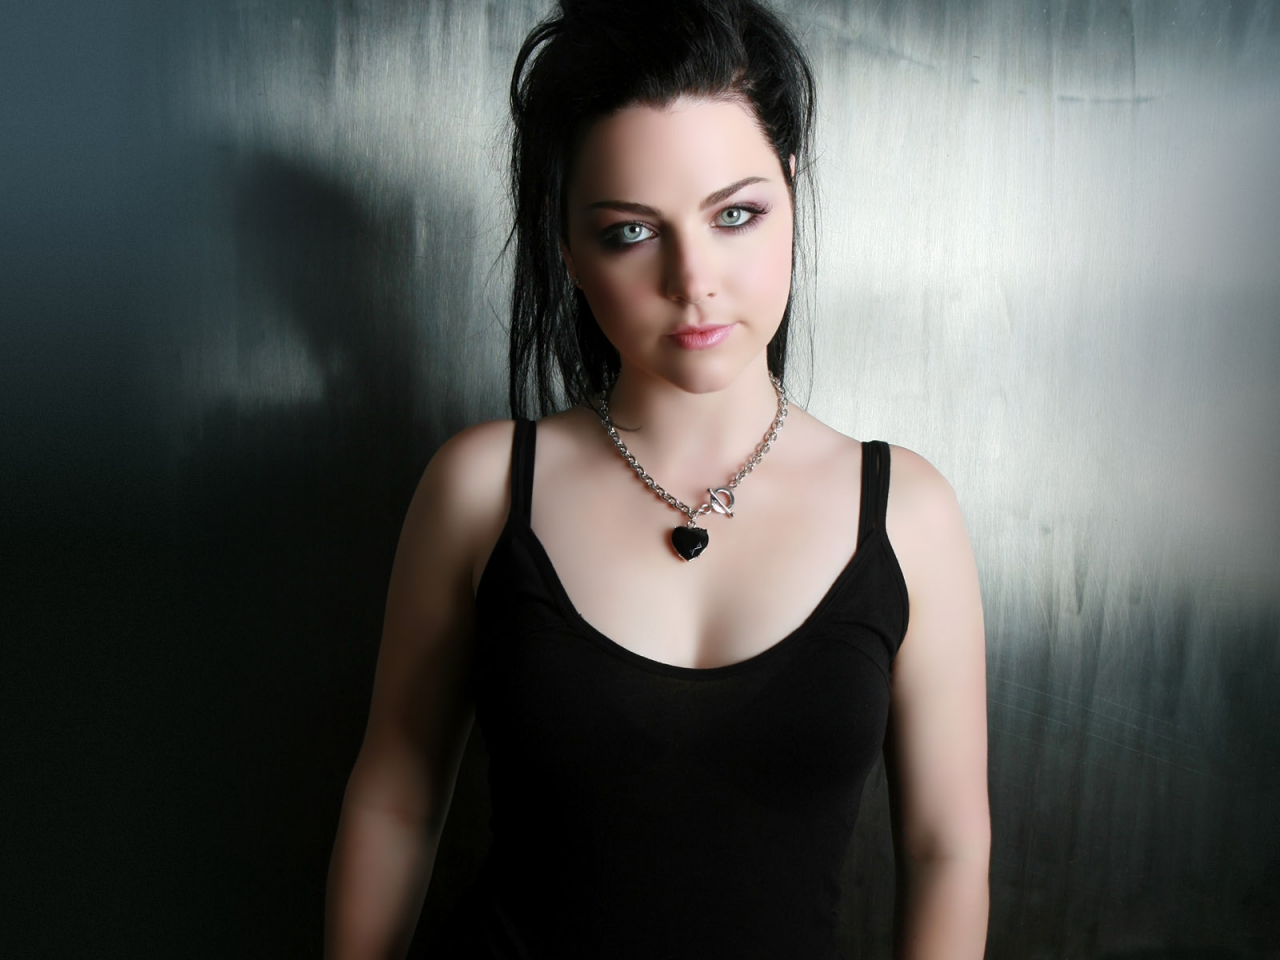 Amy Lee for 1280 x 960 resolution